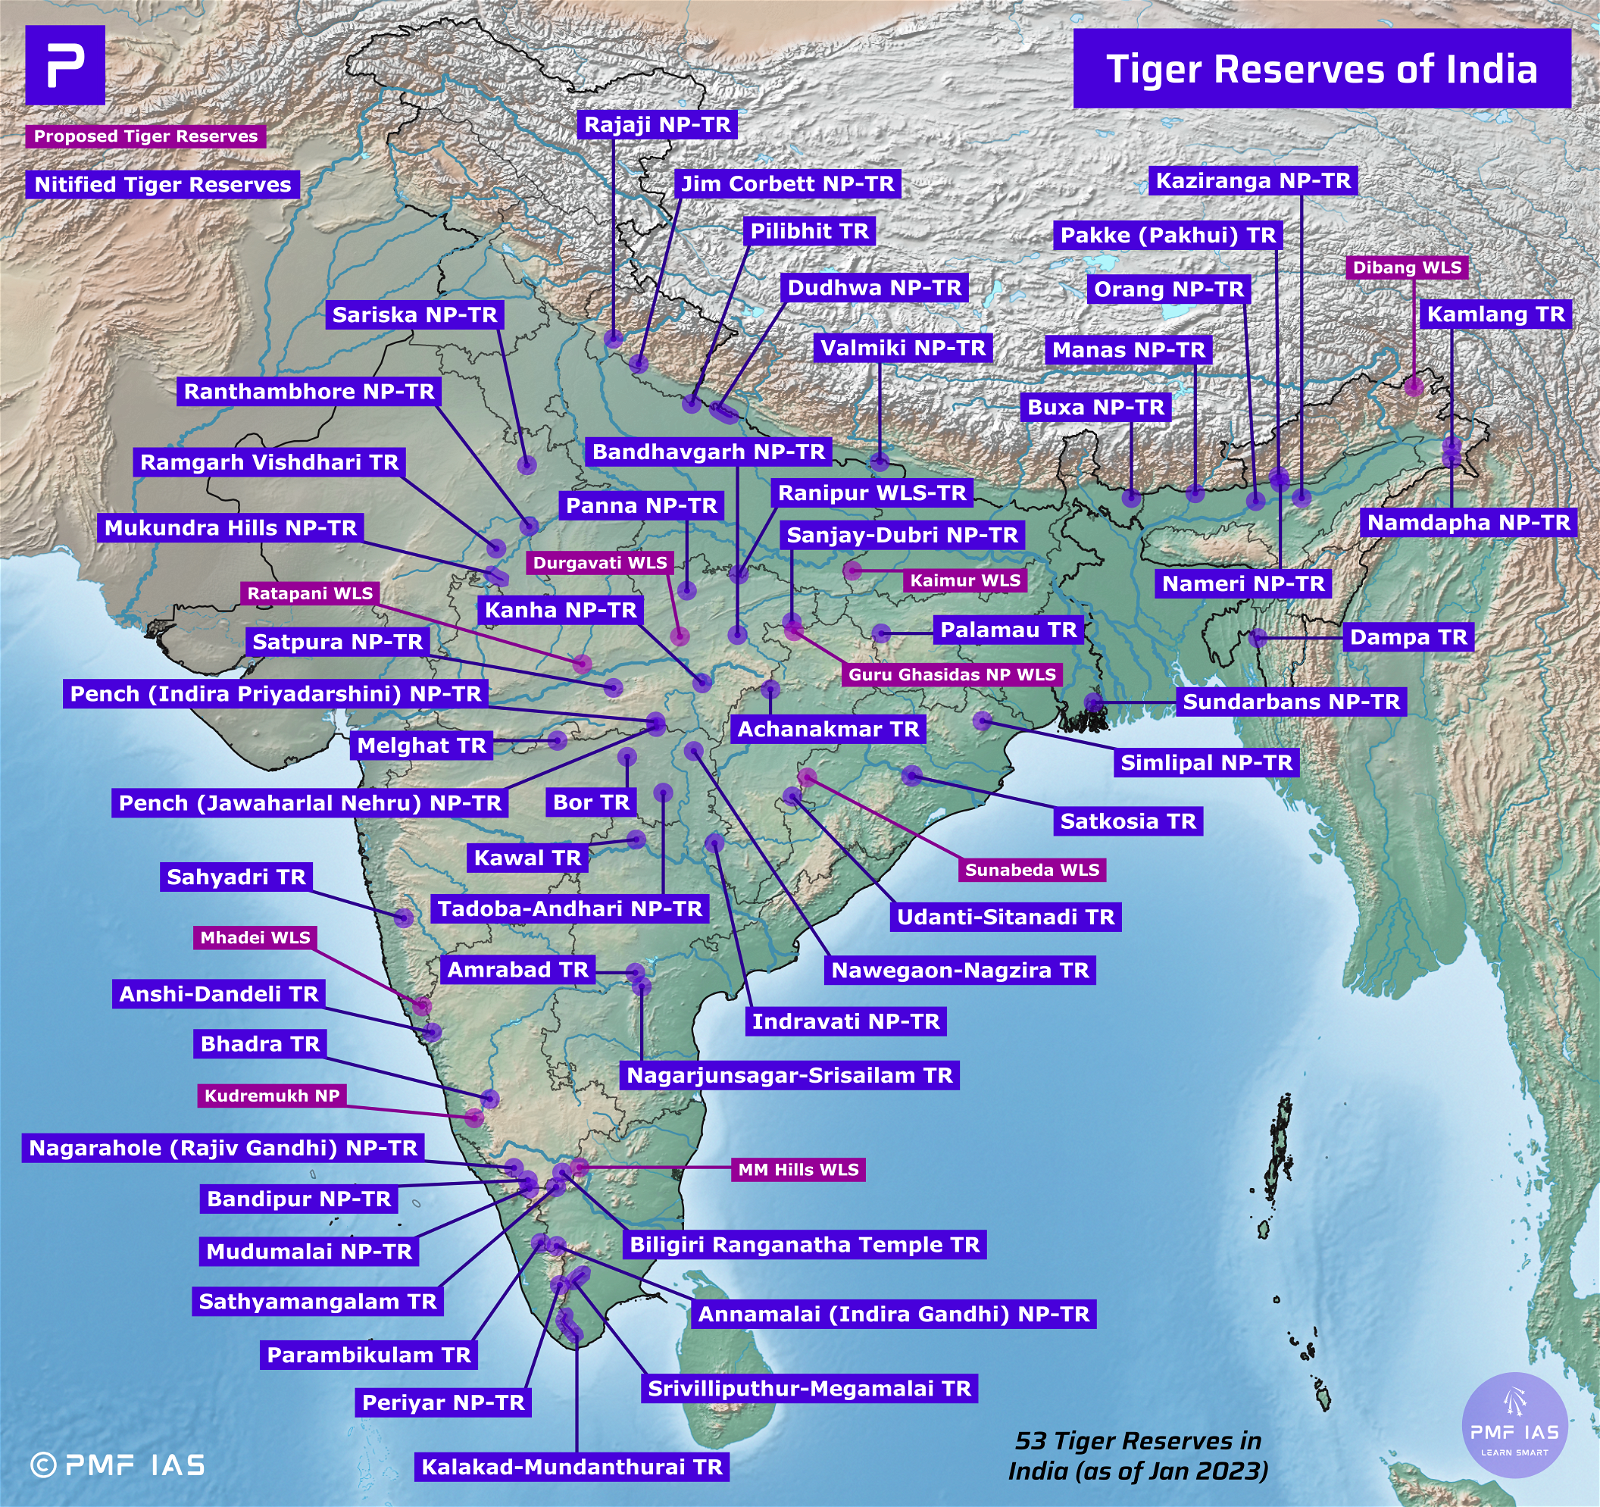 Major Tiger Reserves of India